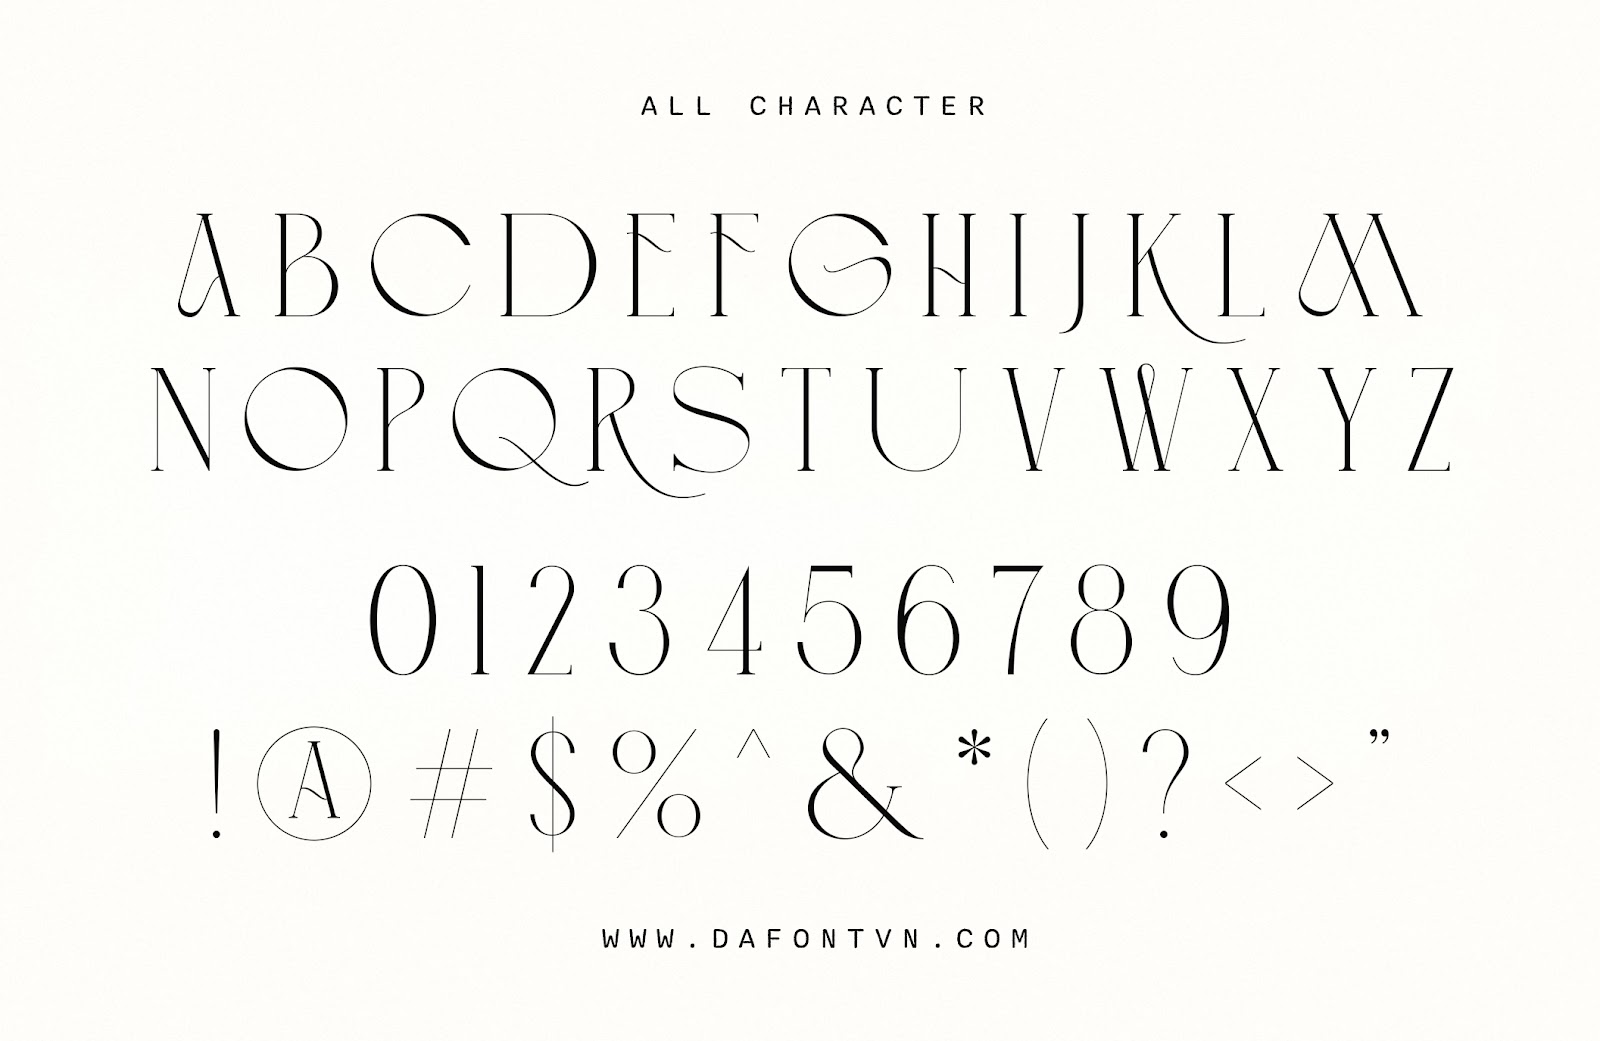 Simple Serenity Font - All Character